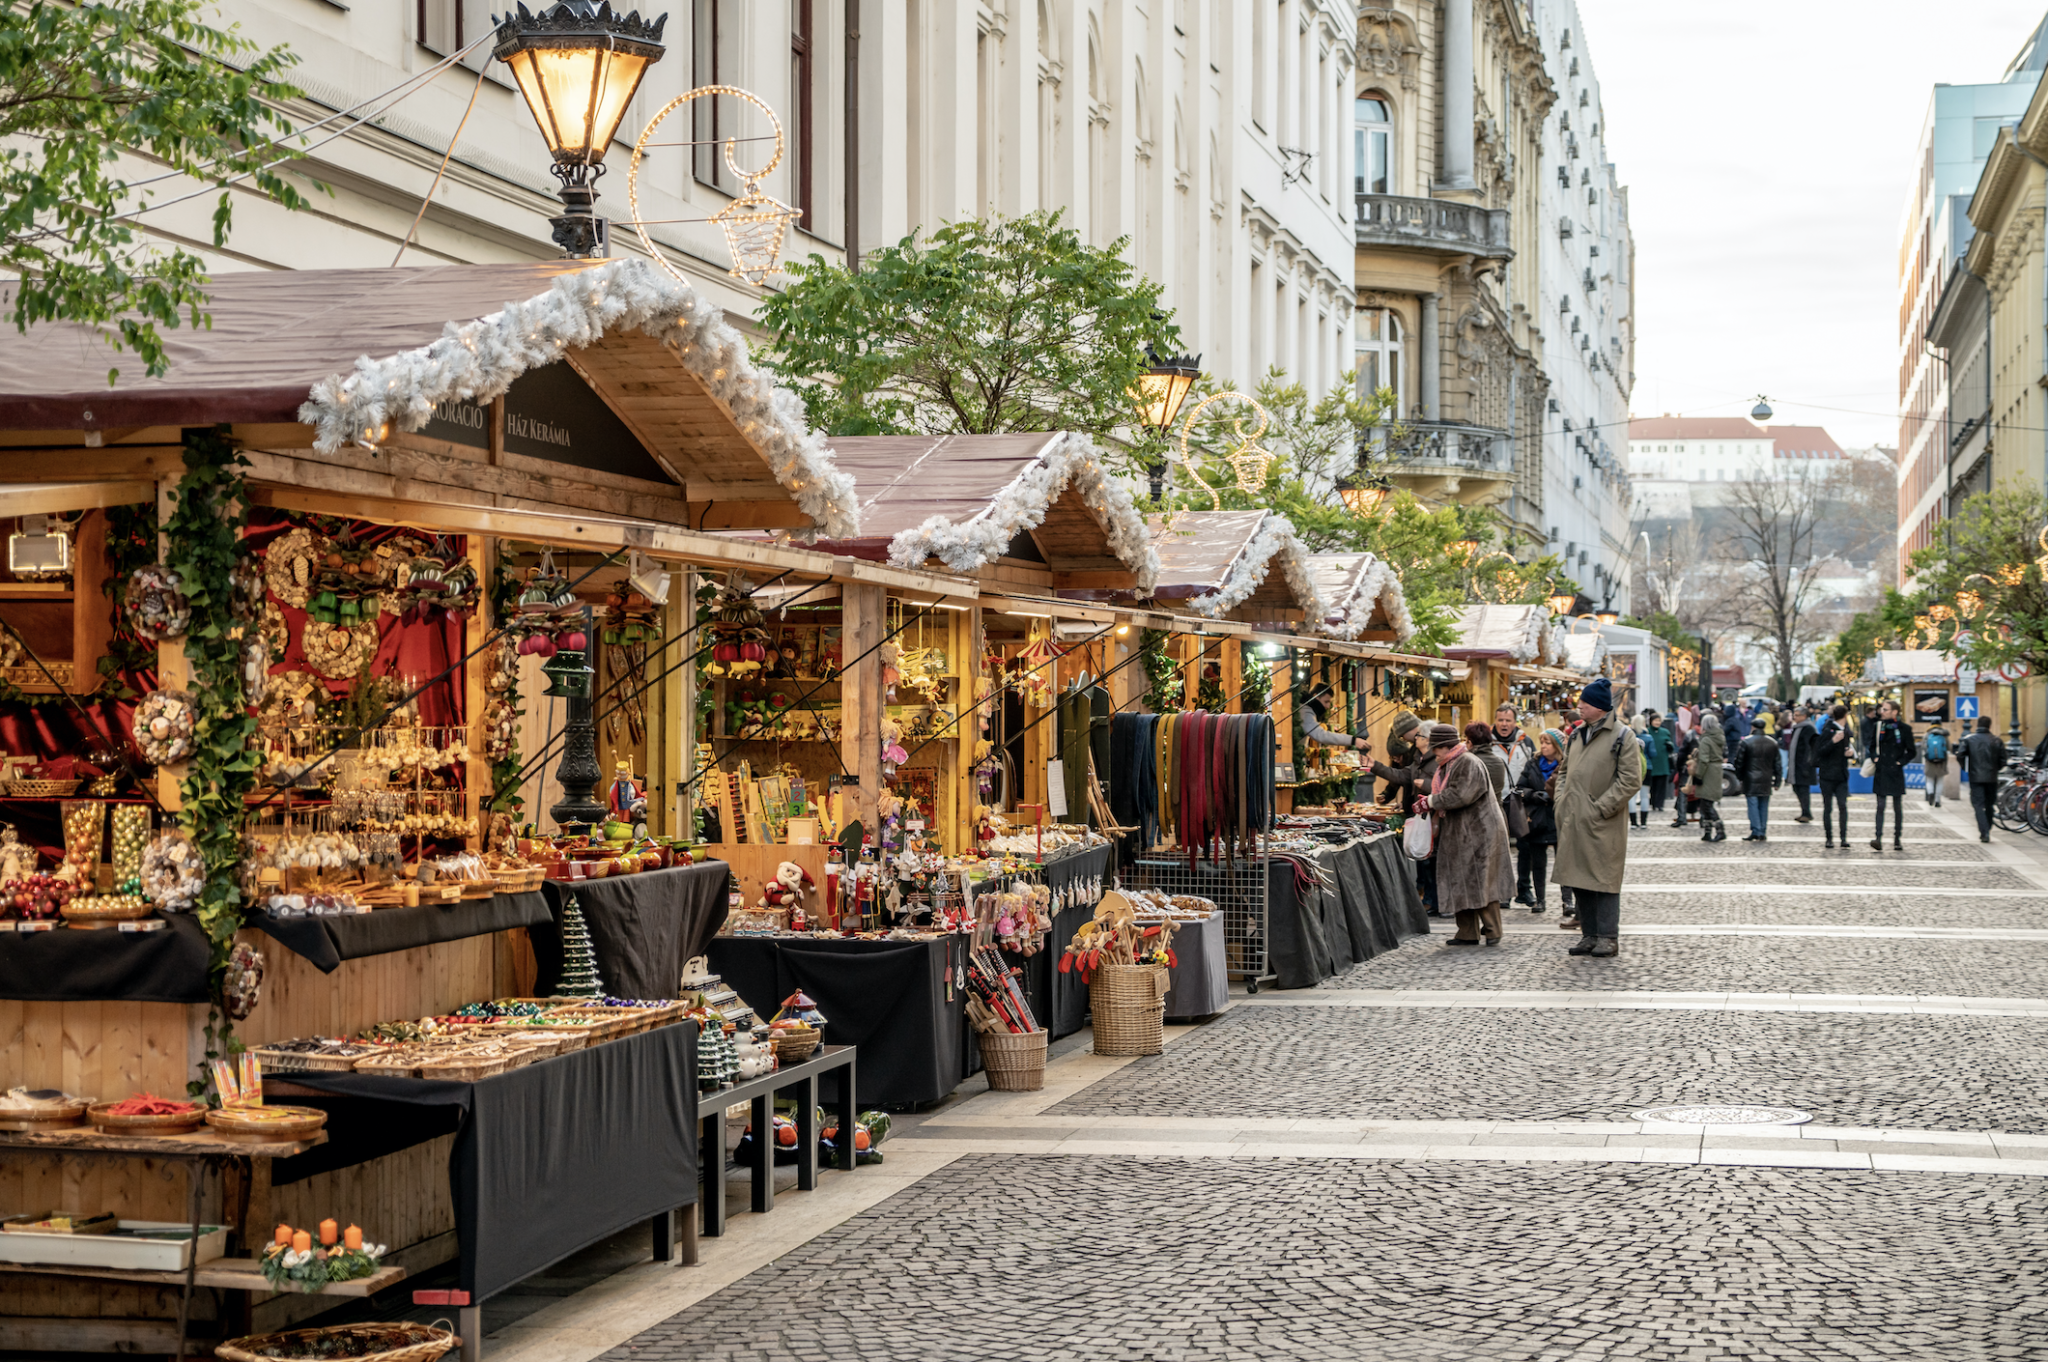 The 2020 ‘Most Beautiful Christmas Markets’ have been revealed